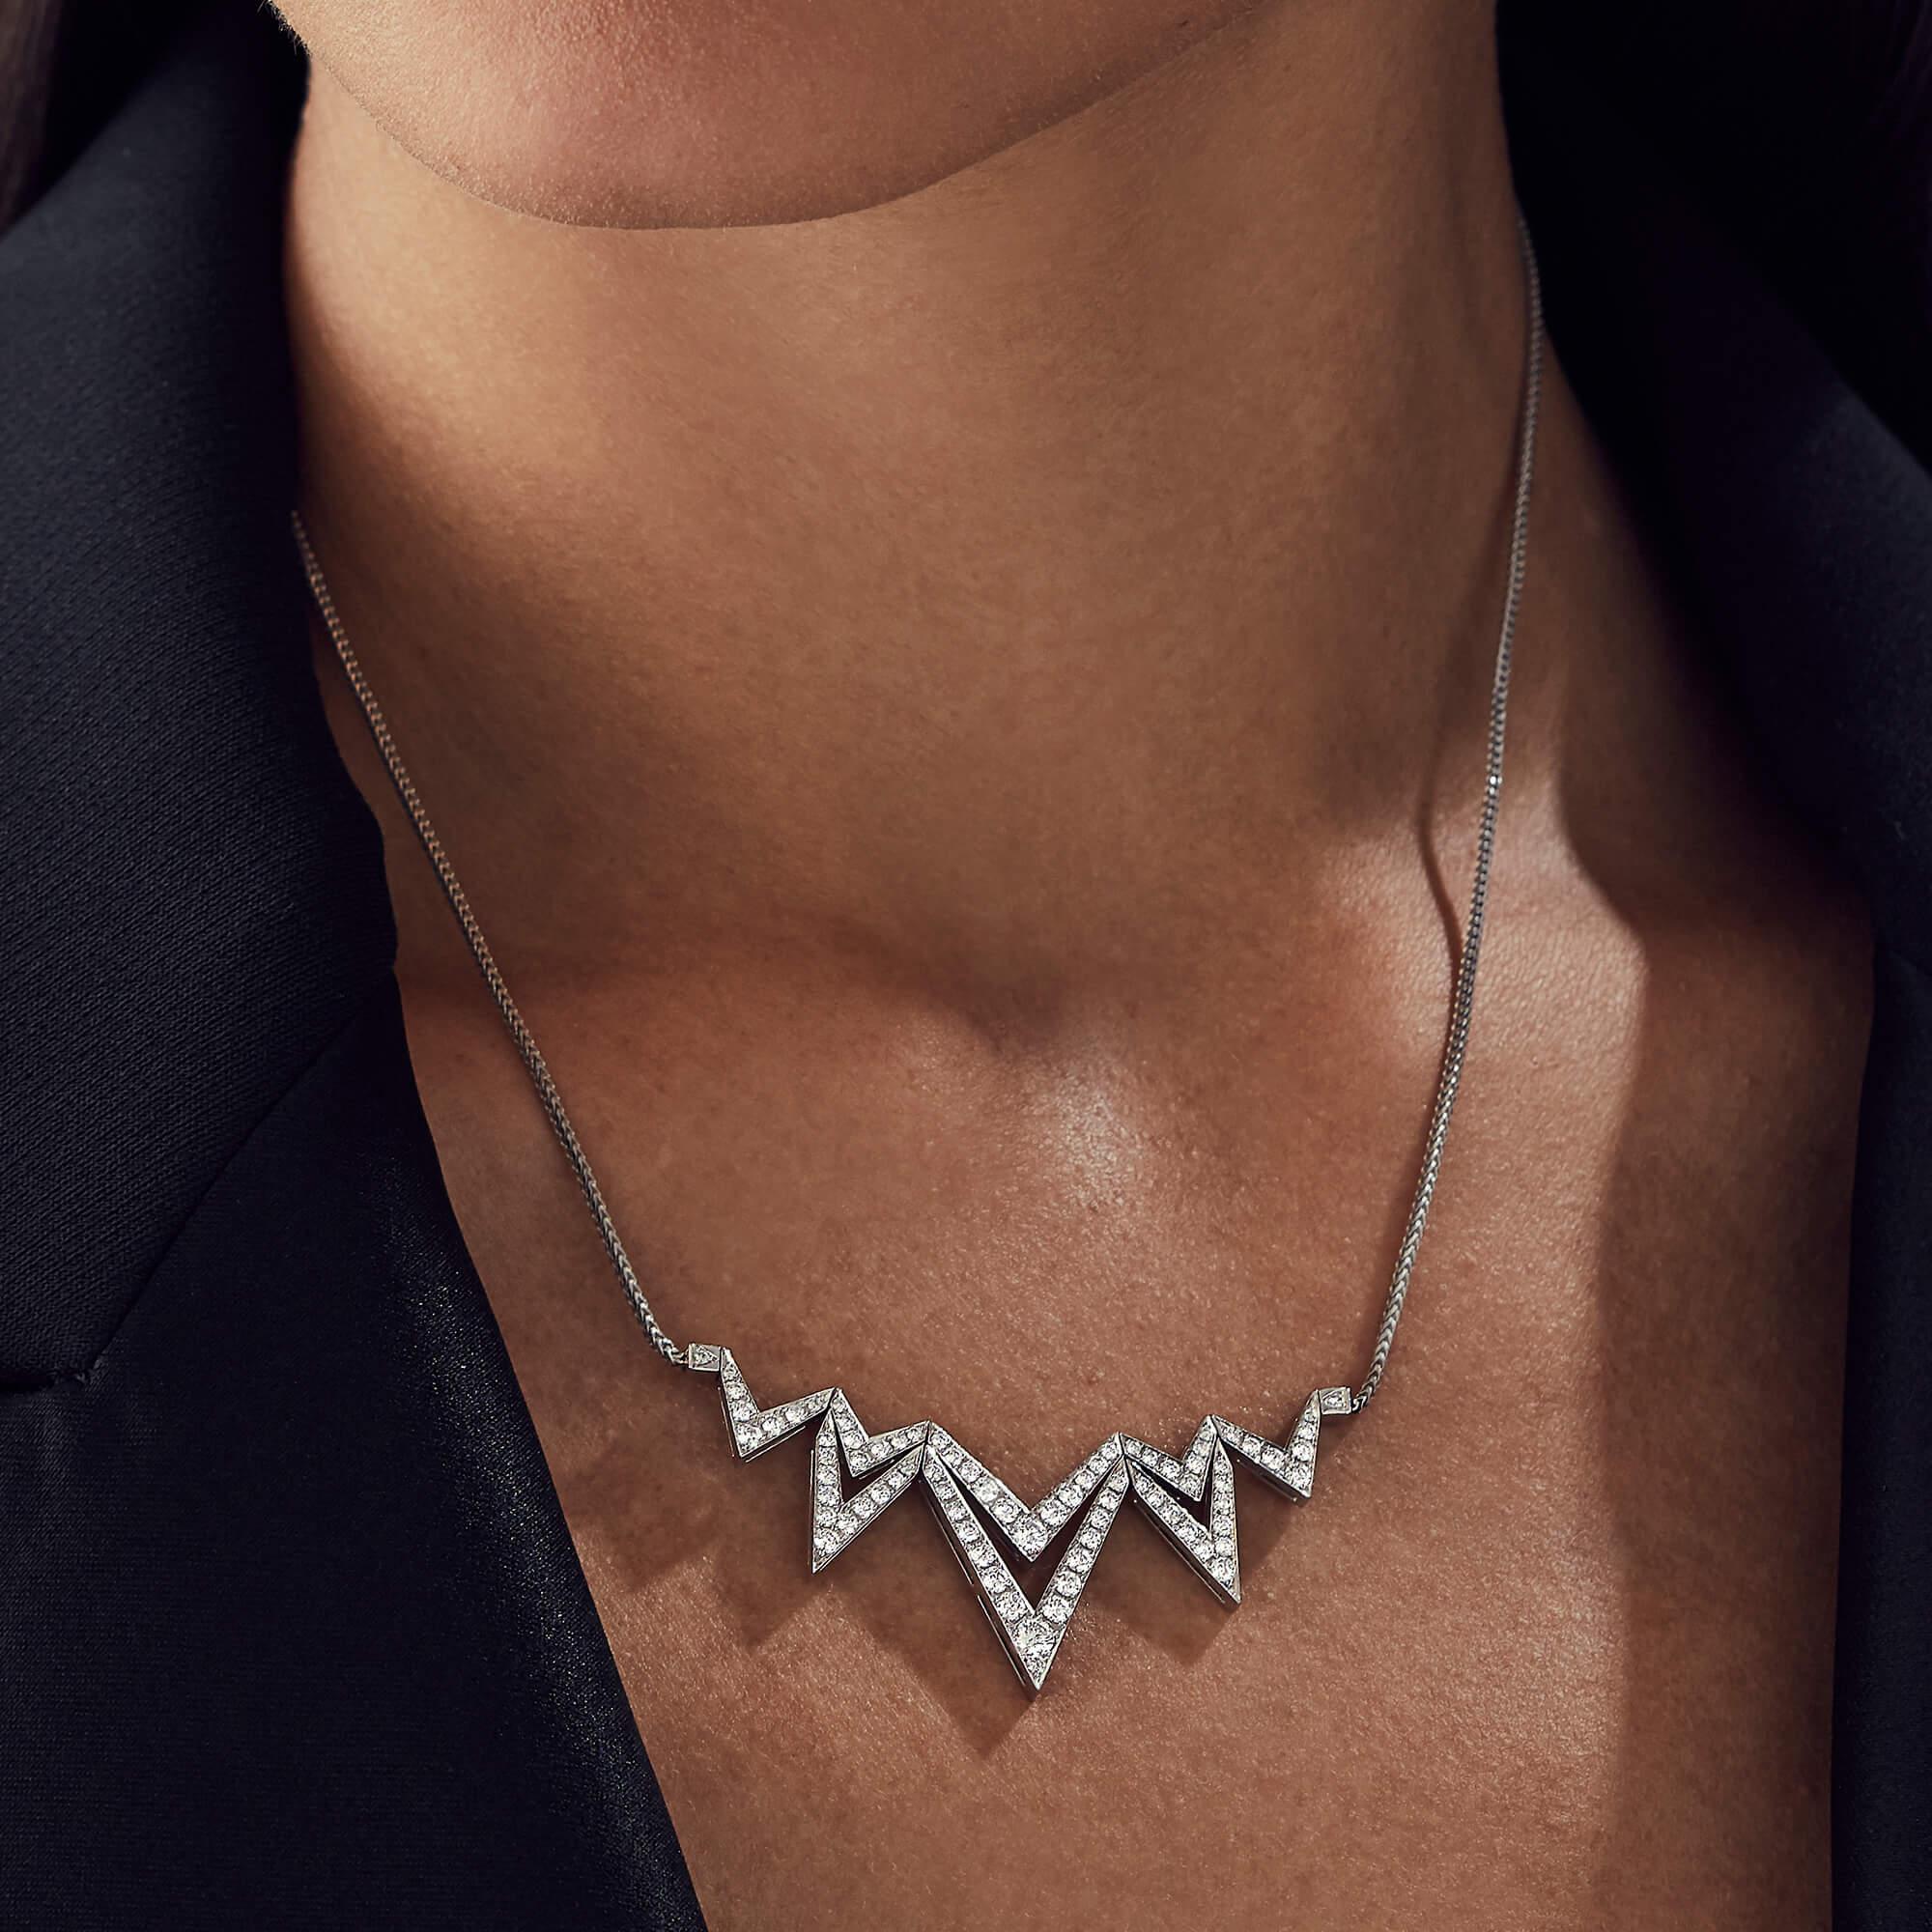 Woven with the fearless, bold v-shaped pattern, the 'Lady Stardust' necklace is handcrafted in 18ct white gold and accentuated with white diamond pavé (1.53cts).

Please enquire for your exclusive price if your delivery country is outside of the